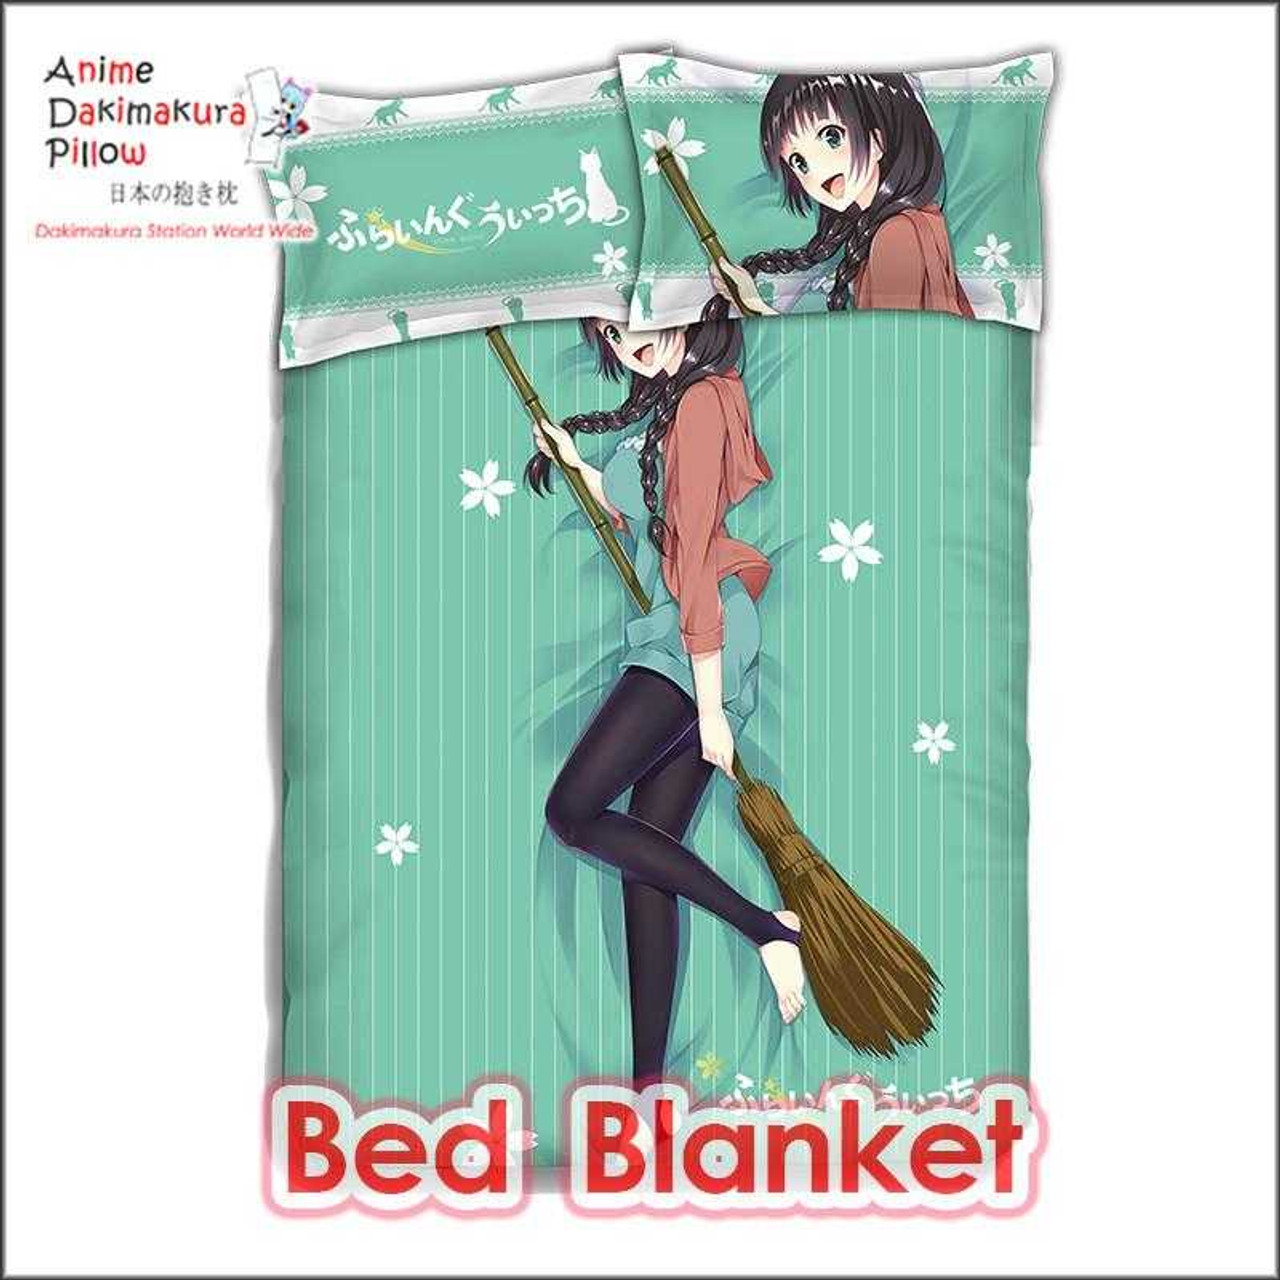 Encouragement of Climb Omoide Present Fuwafuwa Blanket (Anime Toy) -  HobbySearch Anime Goods Store